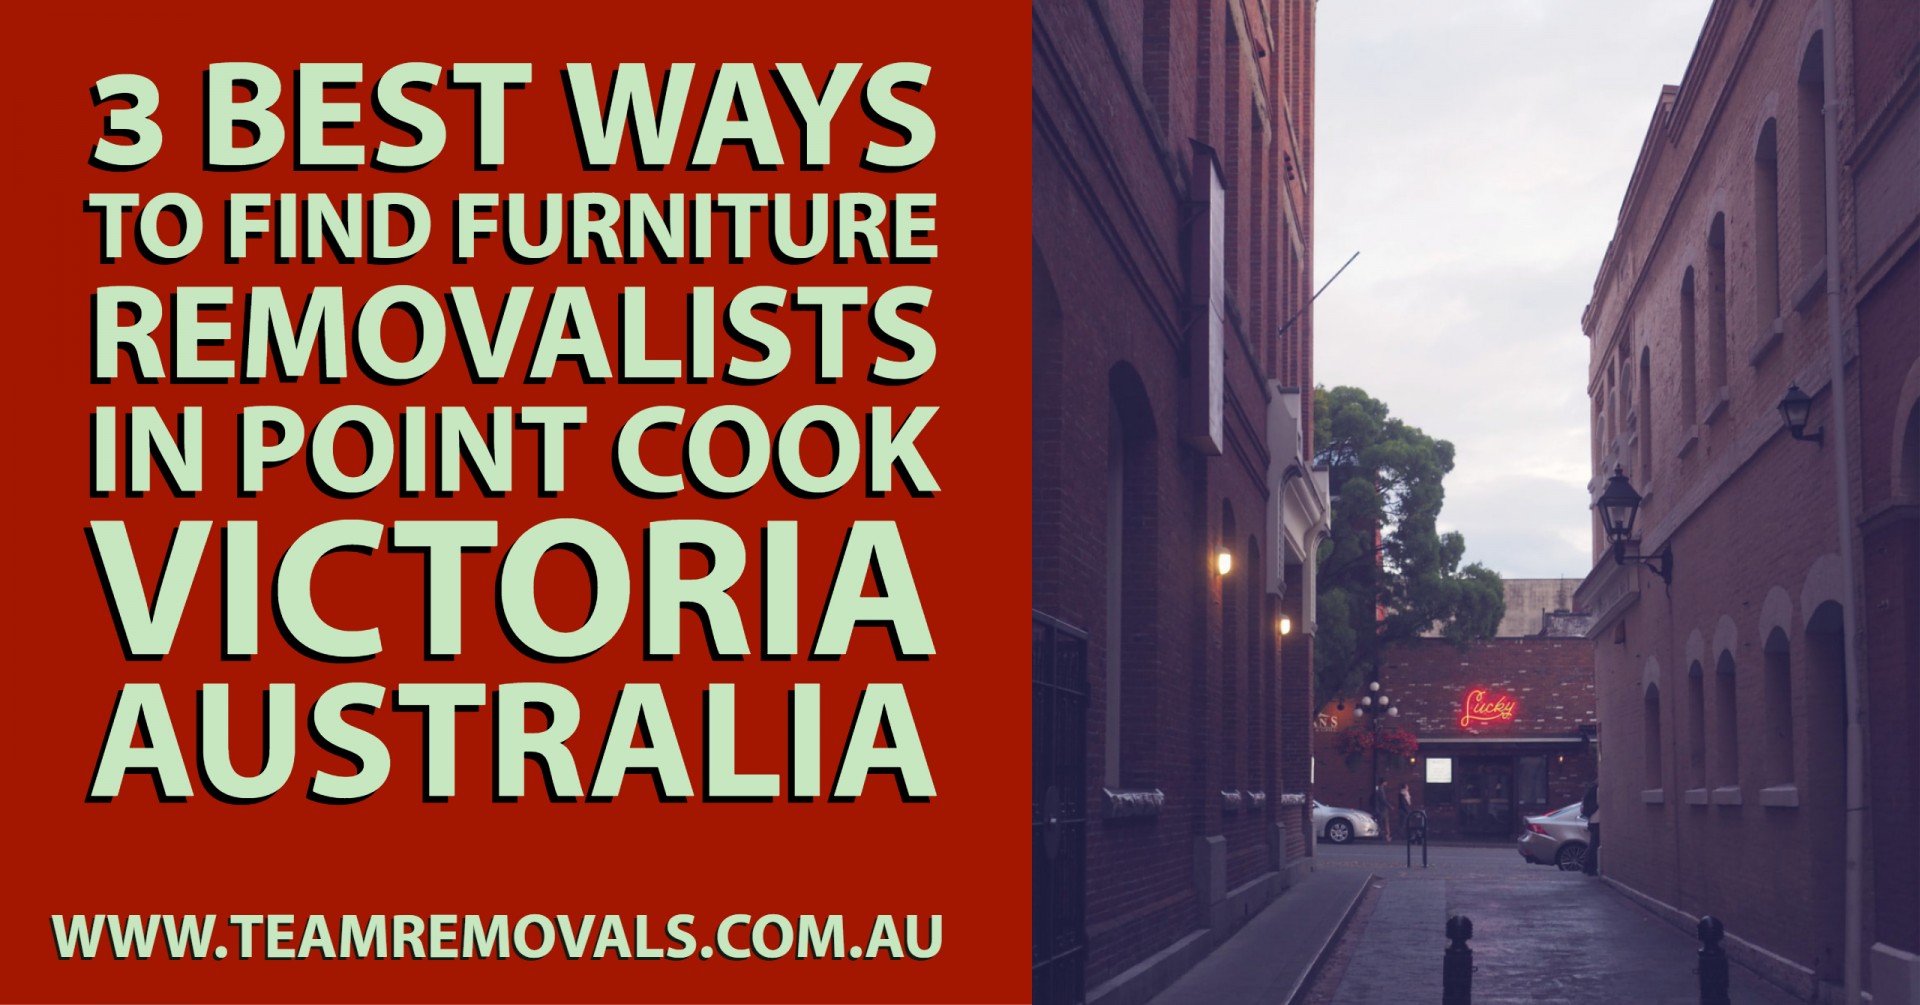 3 Best Ways to Find Furniture Removalists in Point Cook Victoria Australia